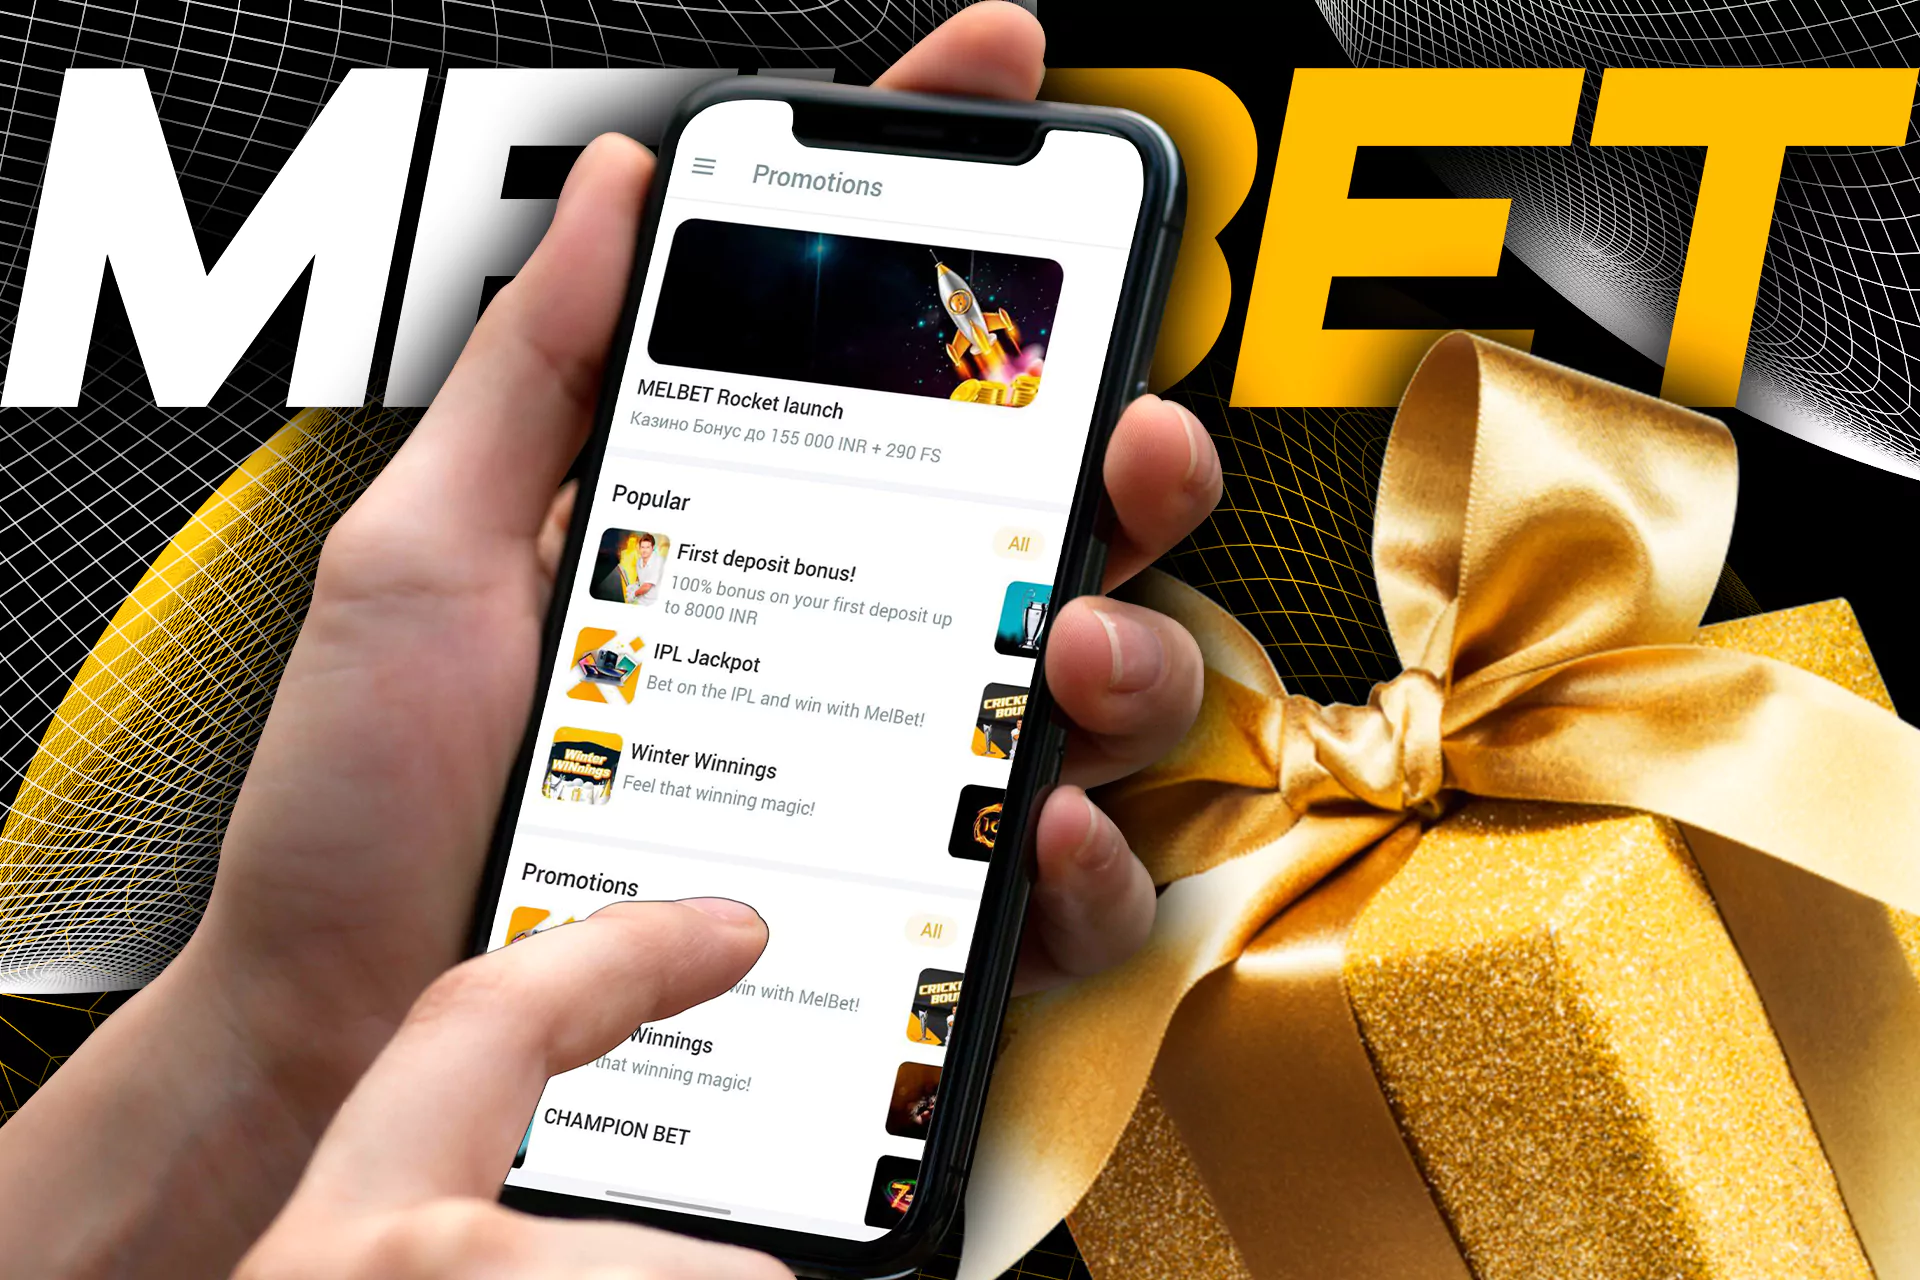 In the Melbet app, you are able to receive all the same bonuses as you on the site.